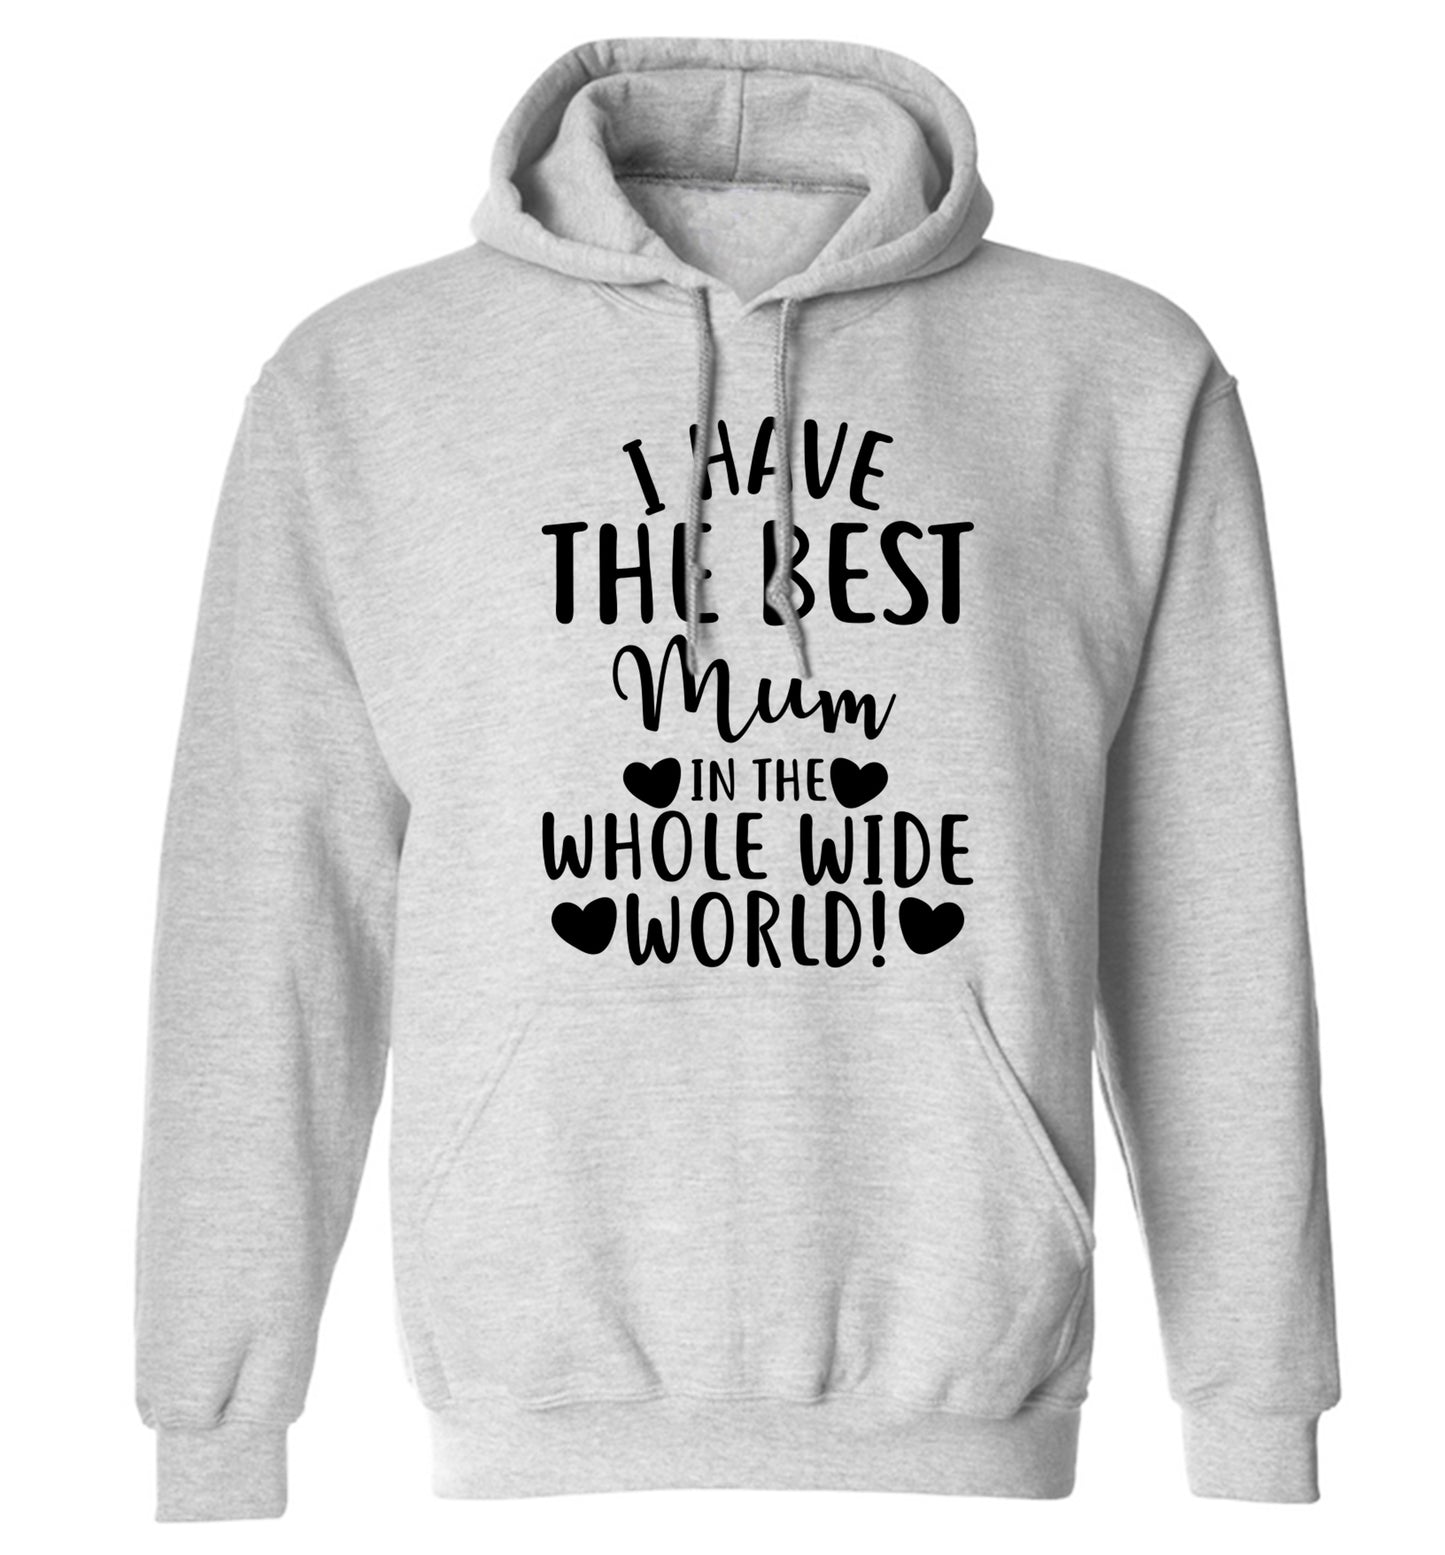 I have the best mum in the whole wide world! adults unisex grey hoodie 2XL